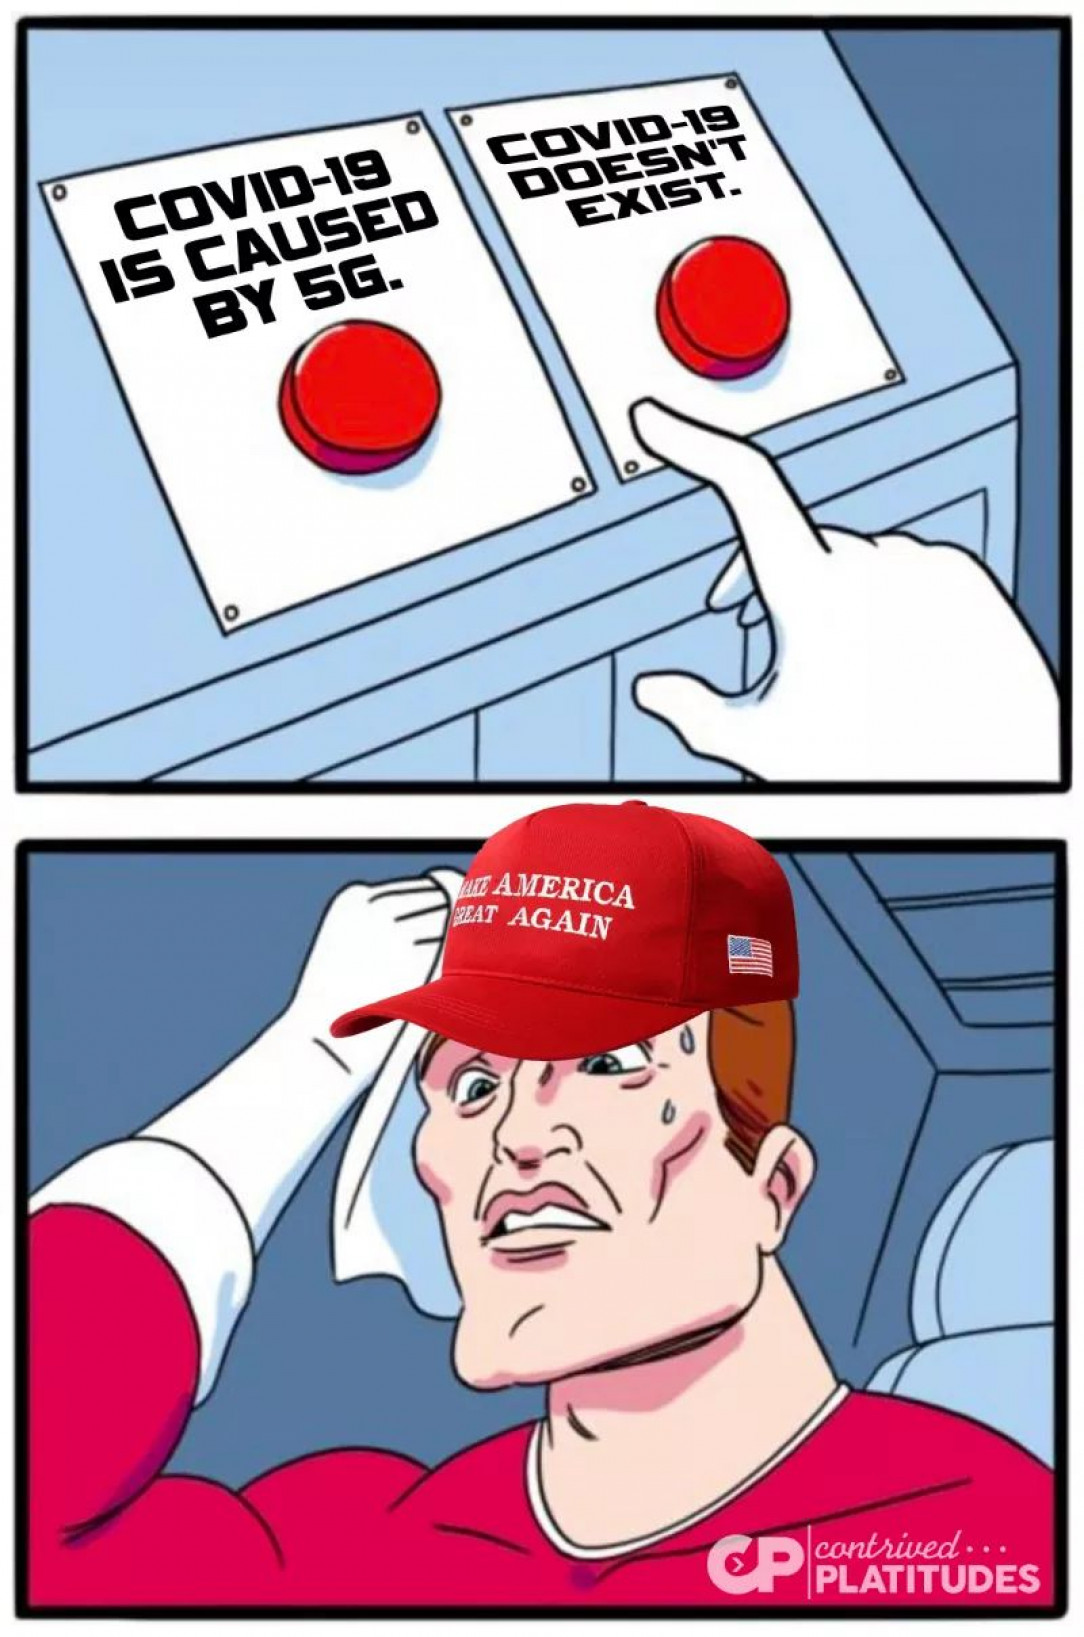 Trump supports be like